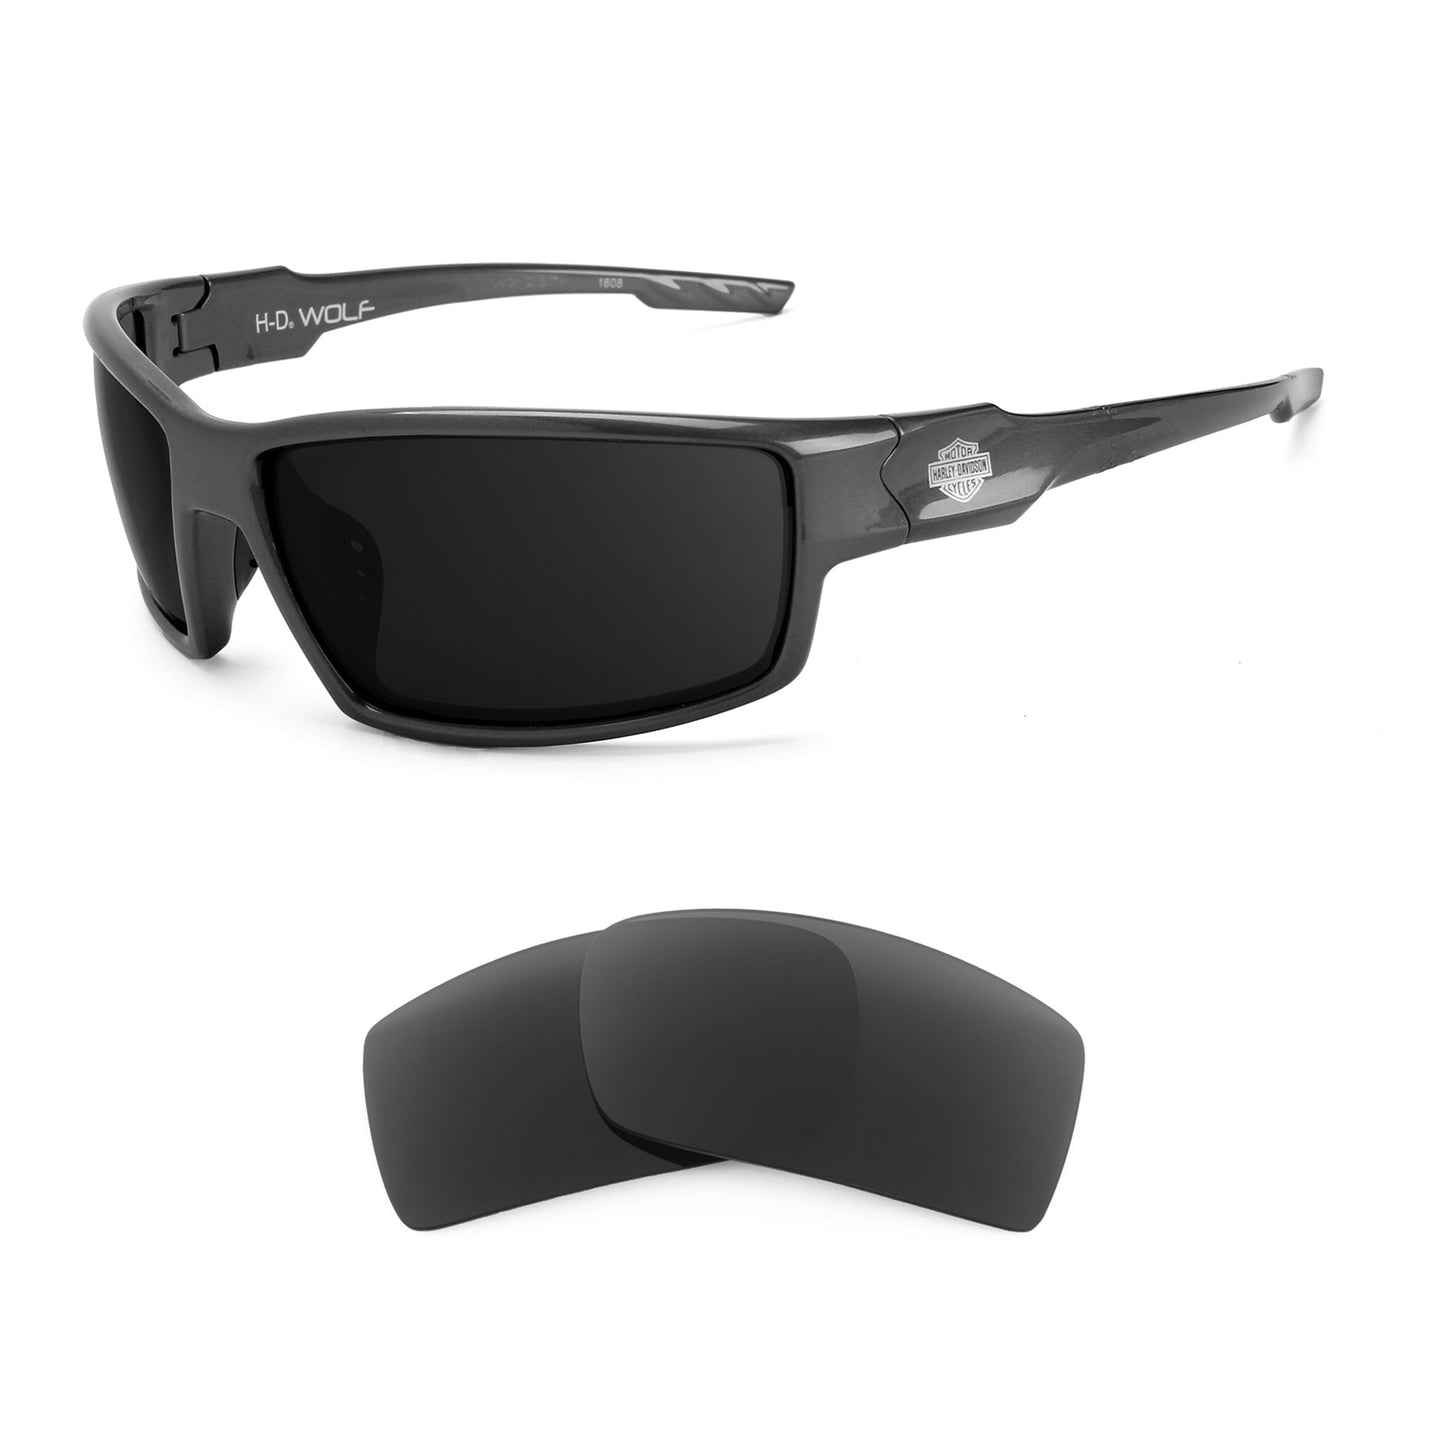 Harley Davidson Wolf sunglasses with replacement lenses